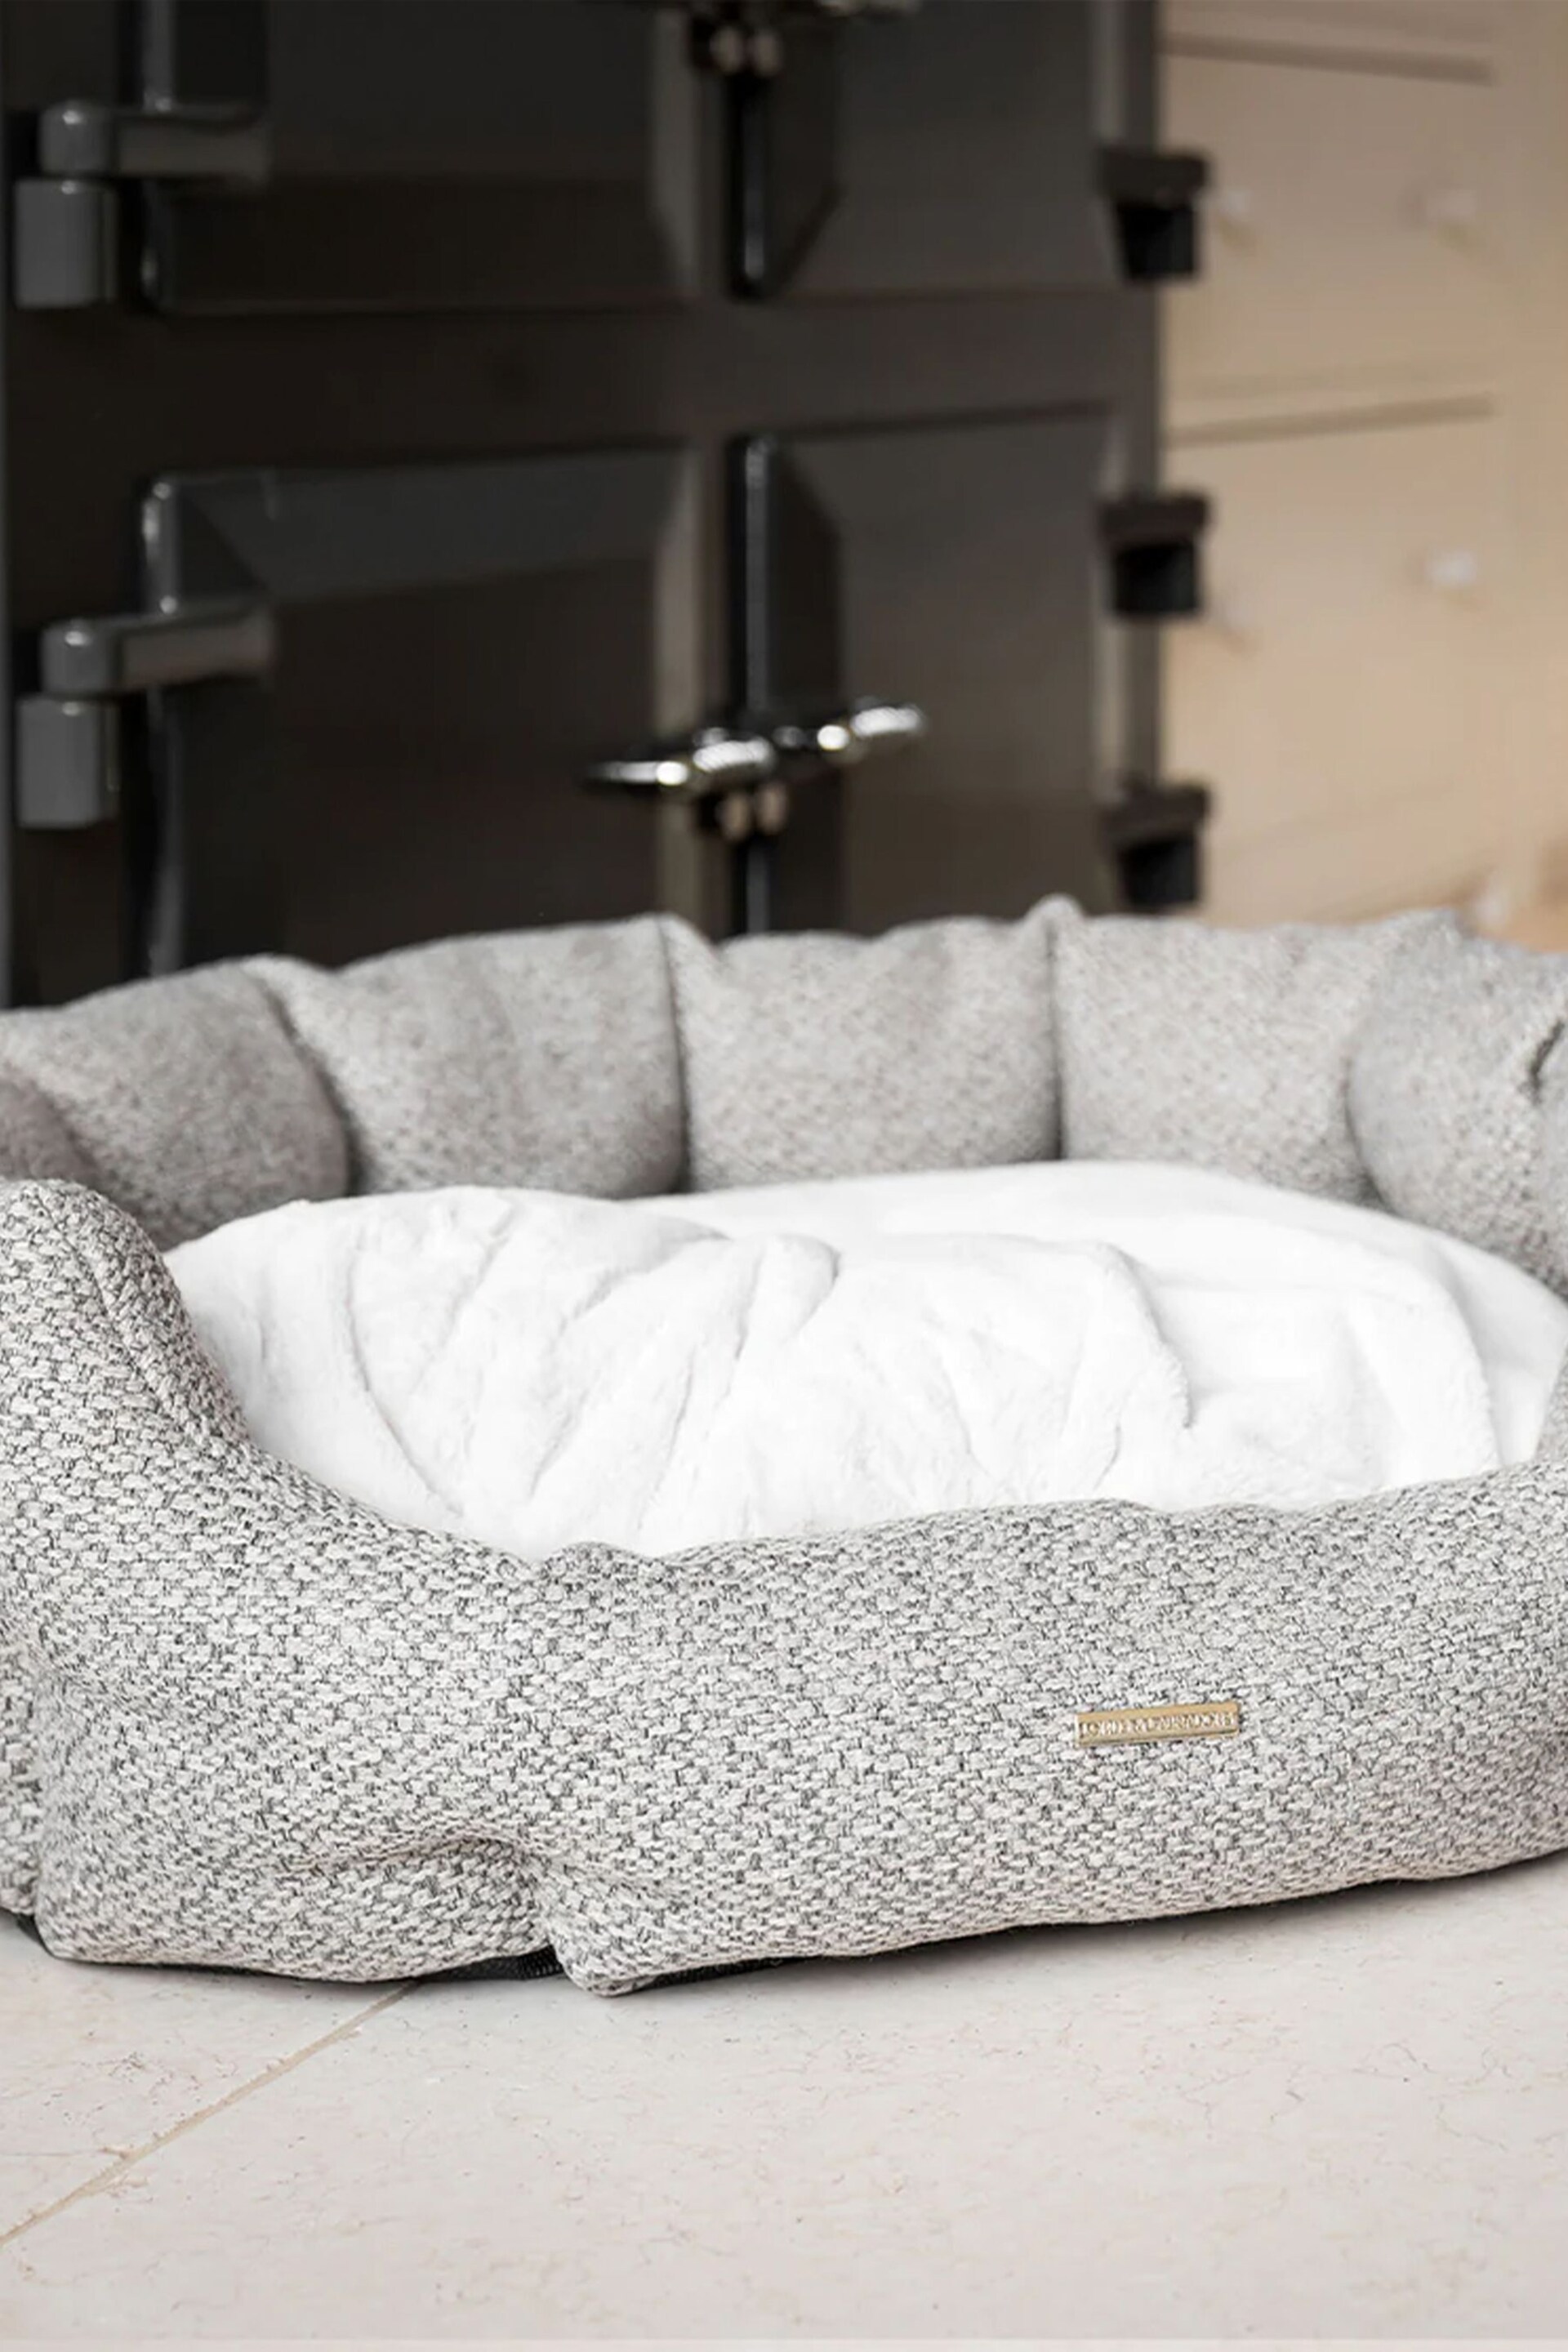 Lords and Labradors Light Grey Essentials Herdwick Oval Dog Bed - Image 3 of 6